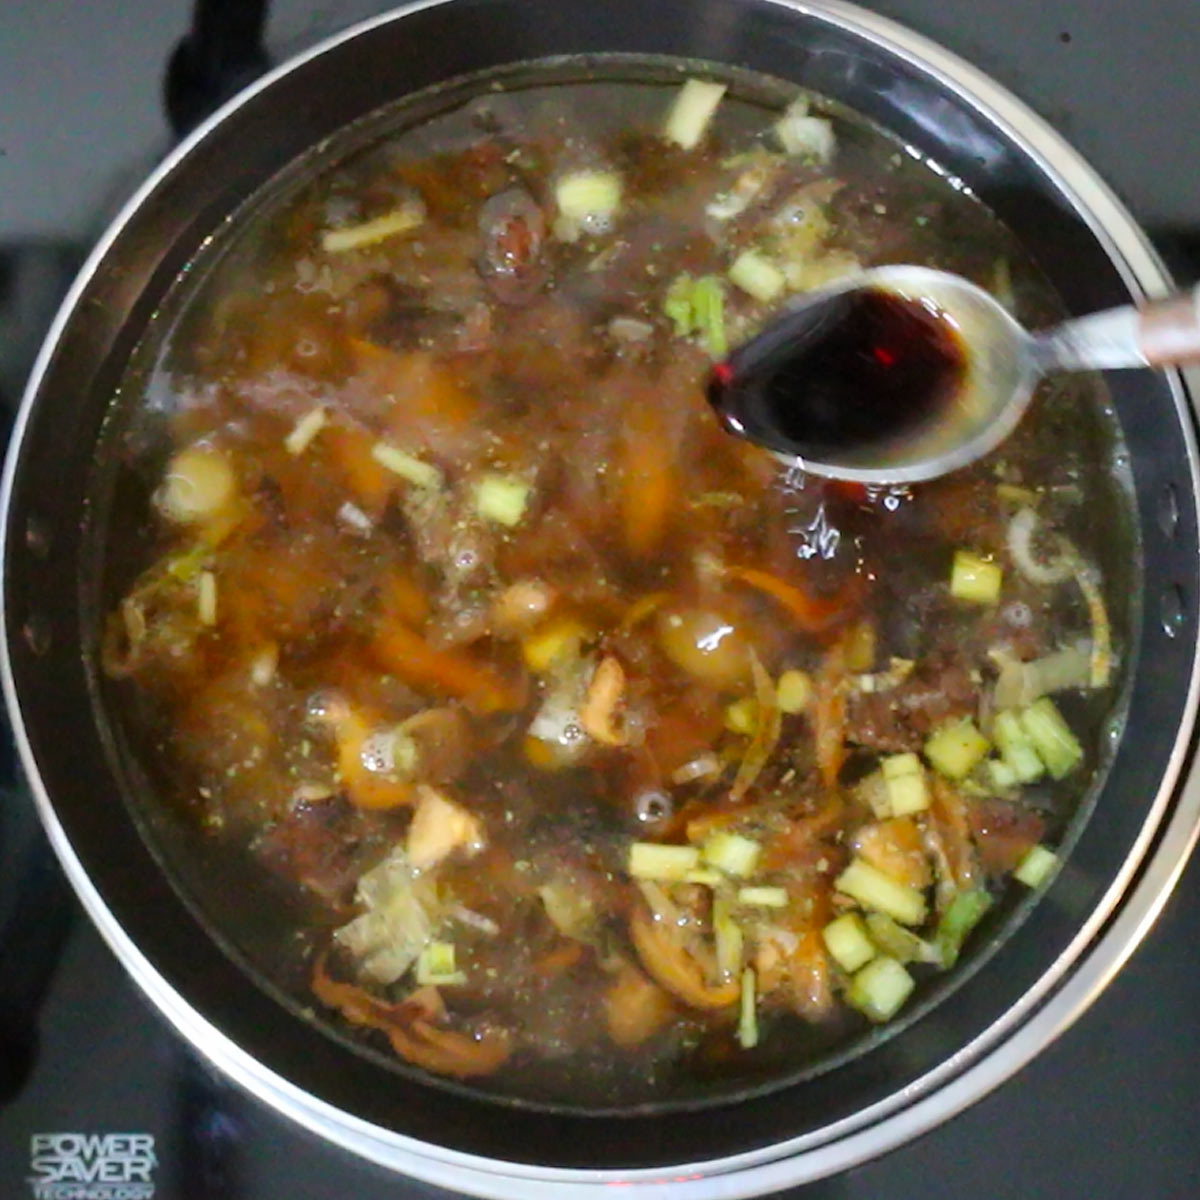 add soy sauce to broth